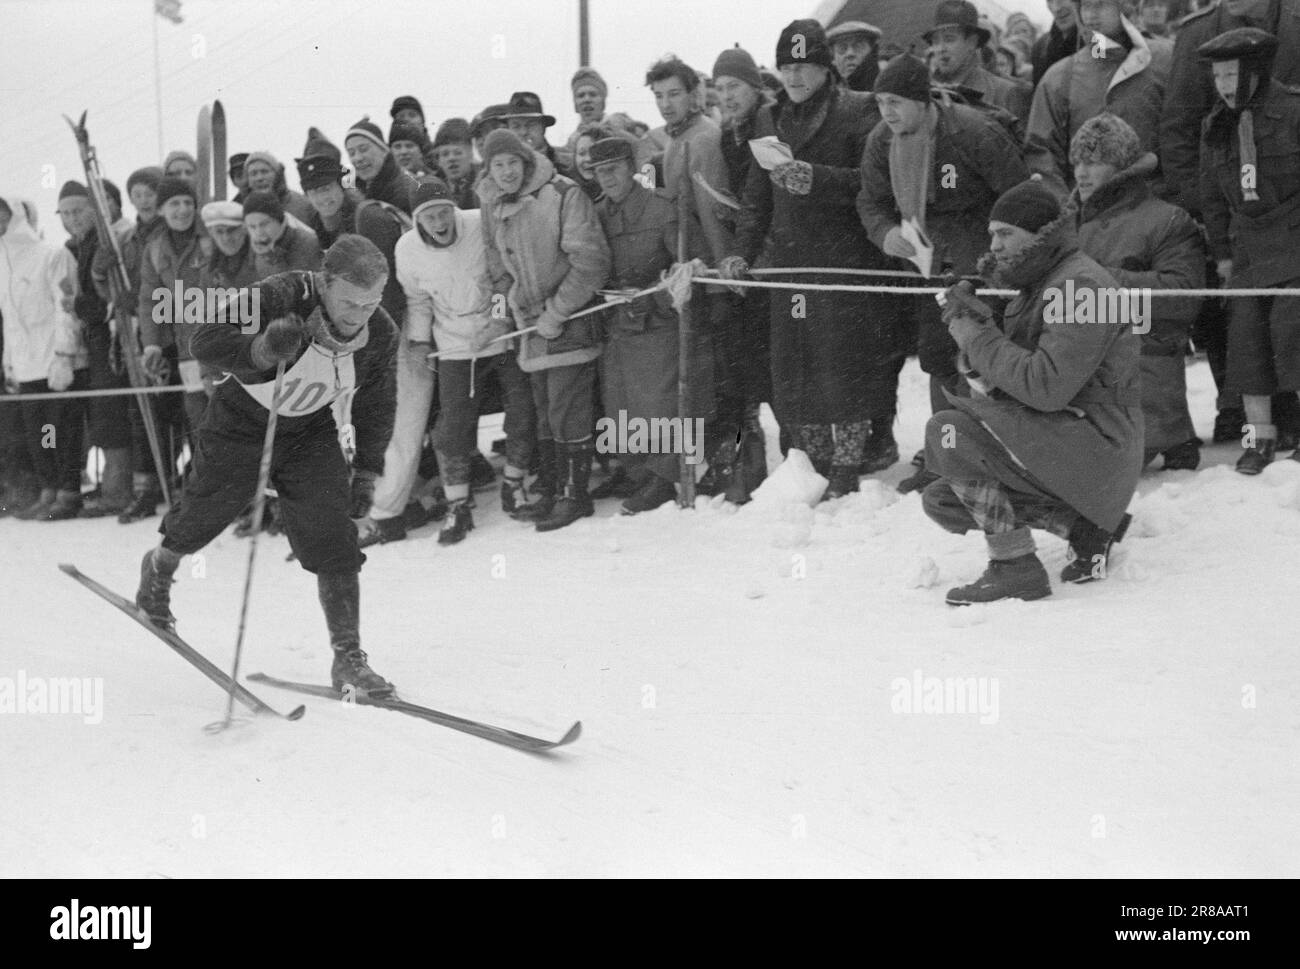 Current 5-5-1947: Holmenkolldagen 1947Holmenkollen It was an ideal day for  the 50th Holmenkollrenn, with a new ground record of 71 metres, set by the  Norwegian Hans Kaarstein, BUL, Oslo. Swede Sven Israelsson